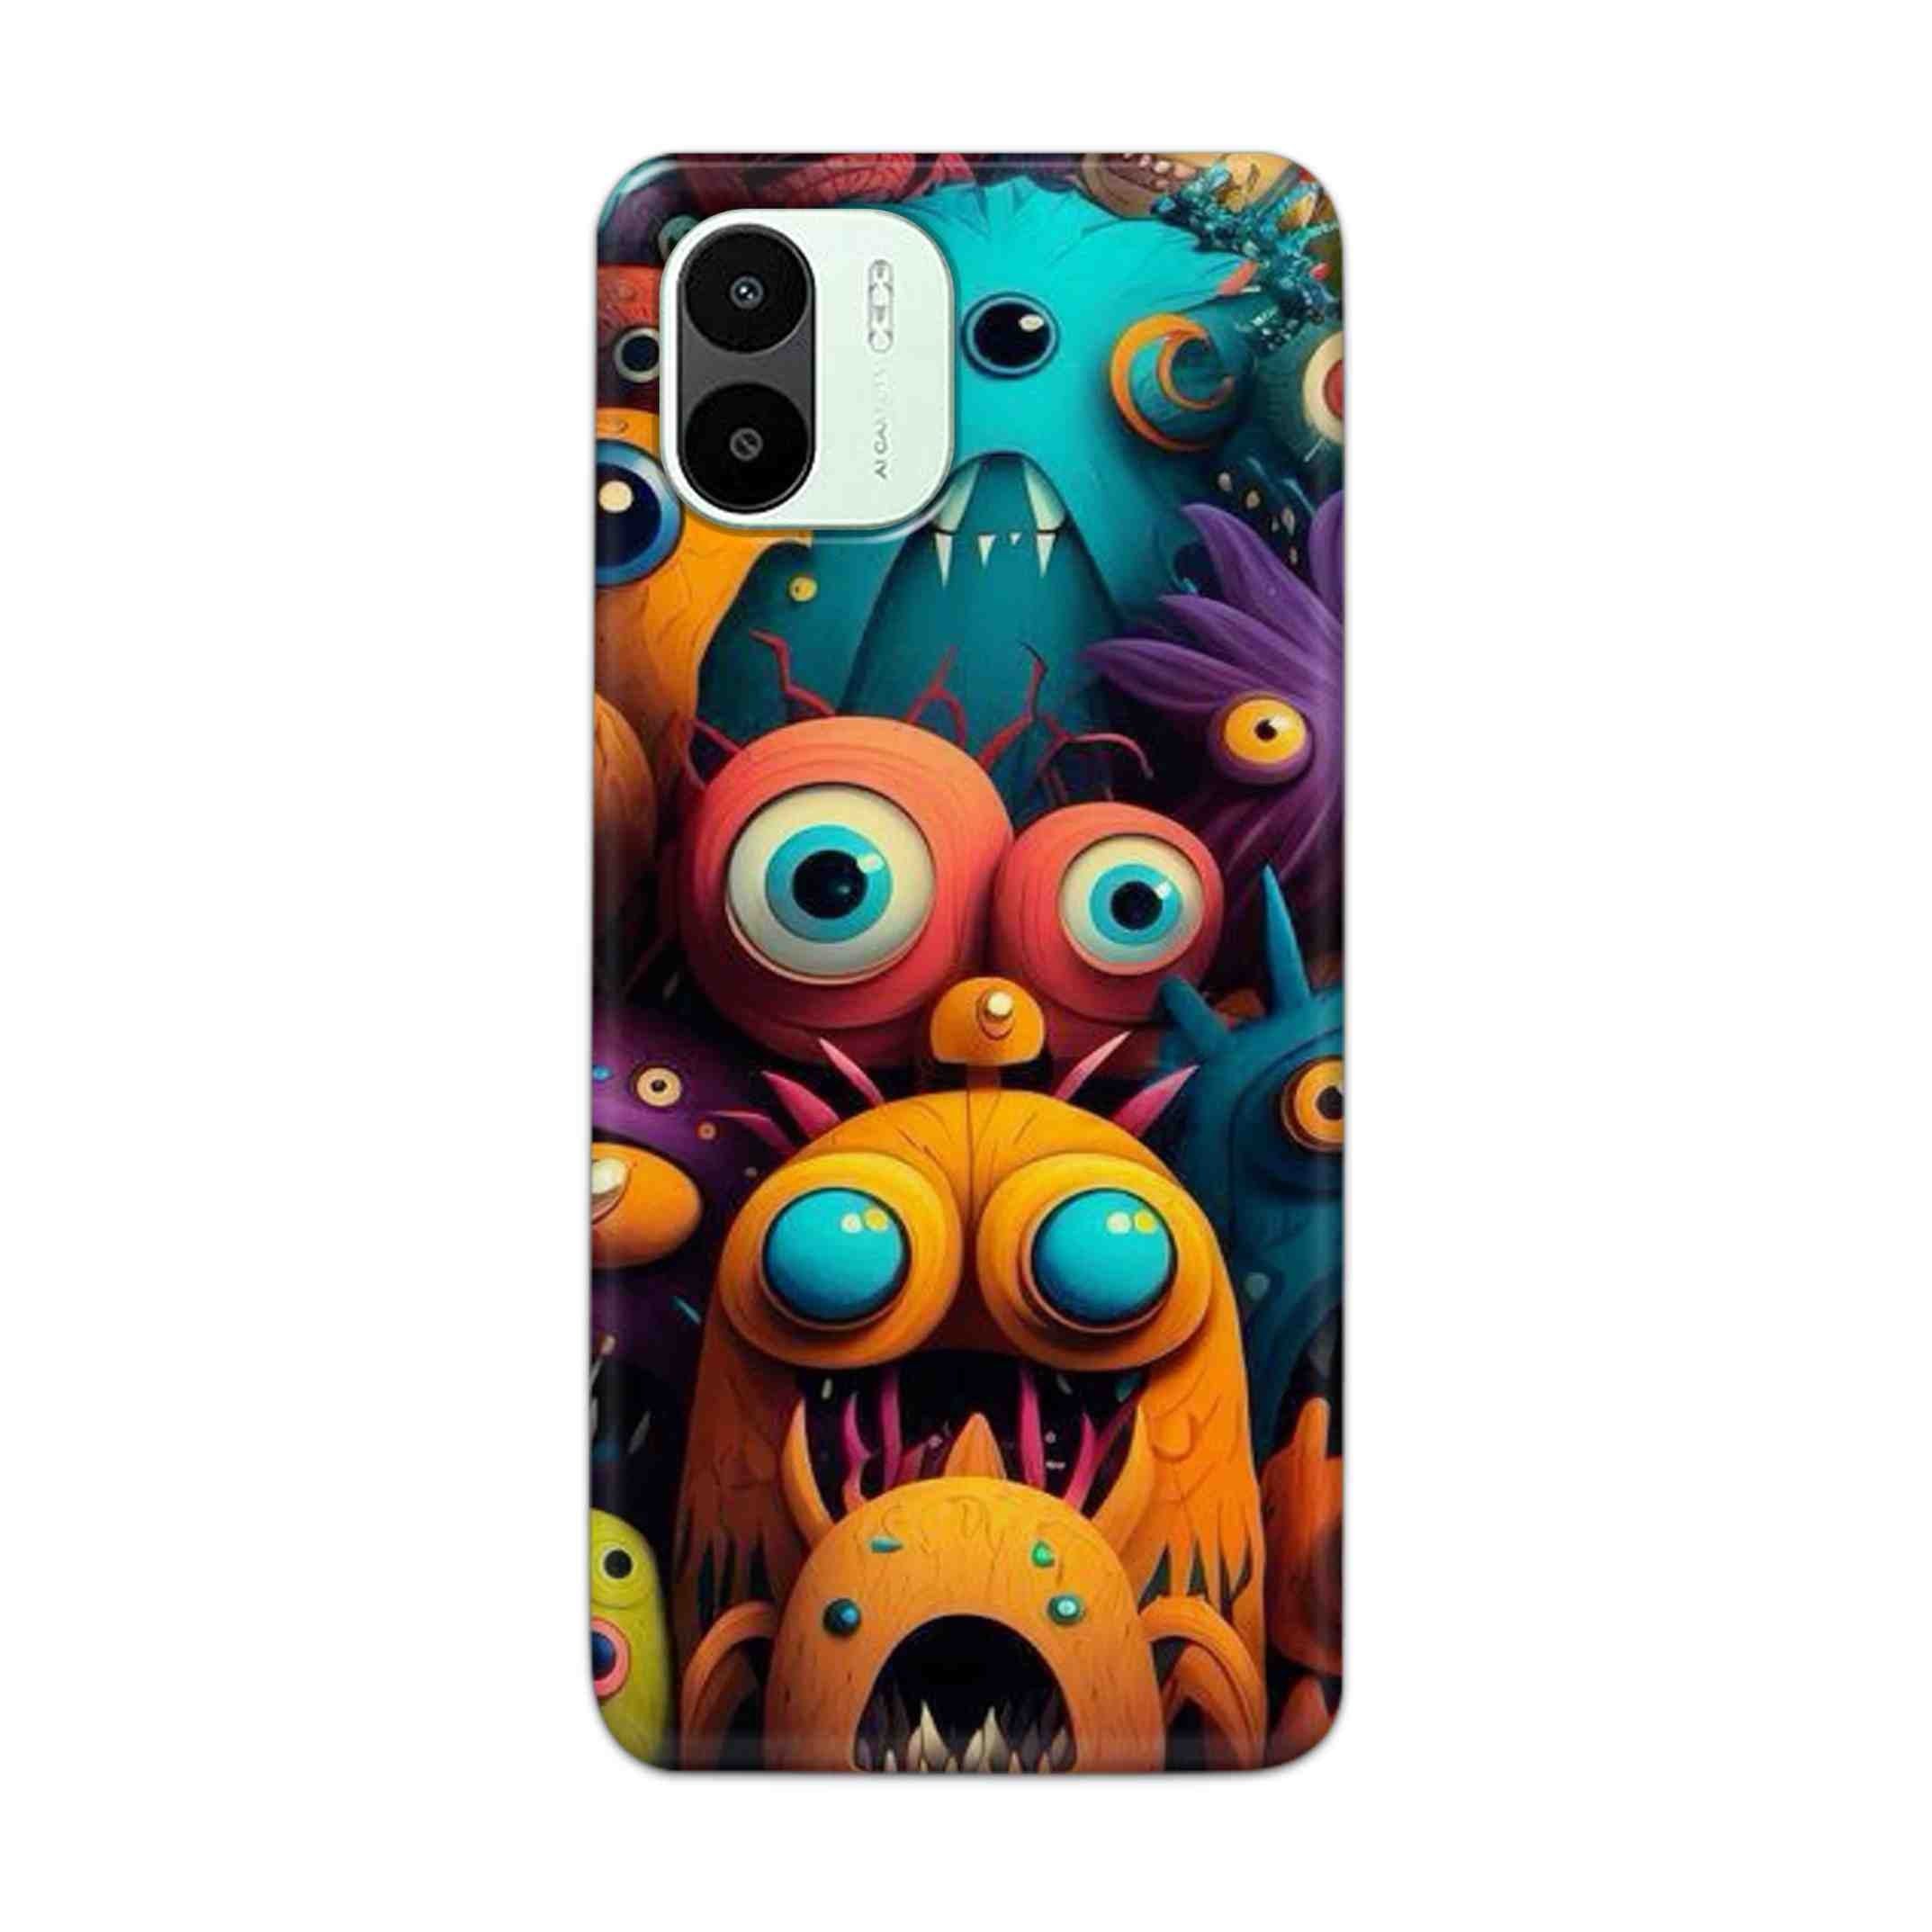 Buy Zombie Hard Back Mobile Phone Case Cover For Xiaomi Redmi A1 5G Online